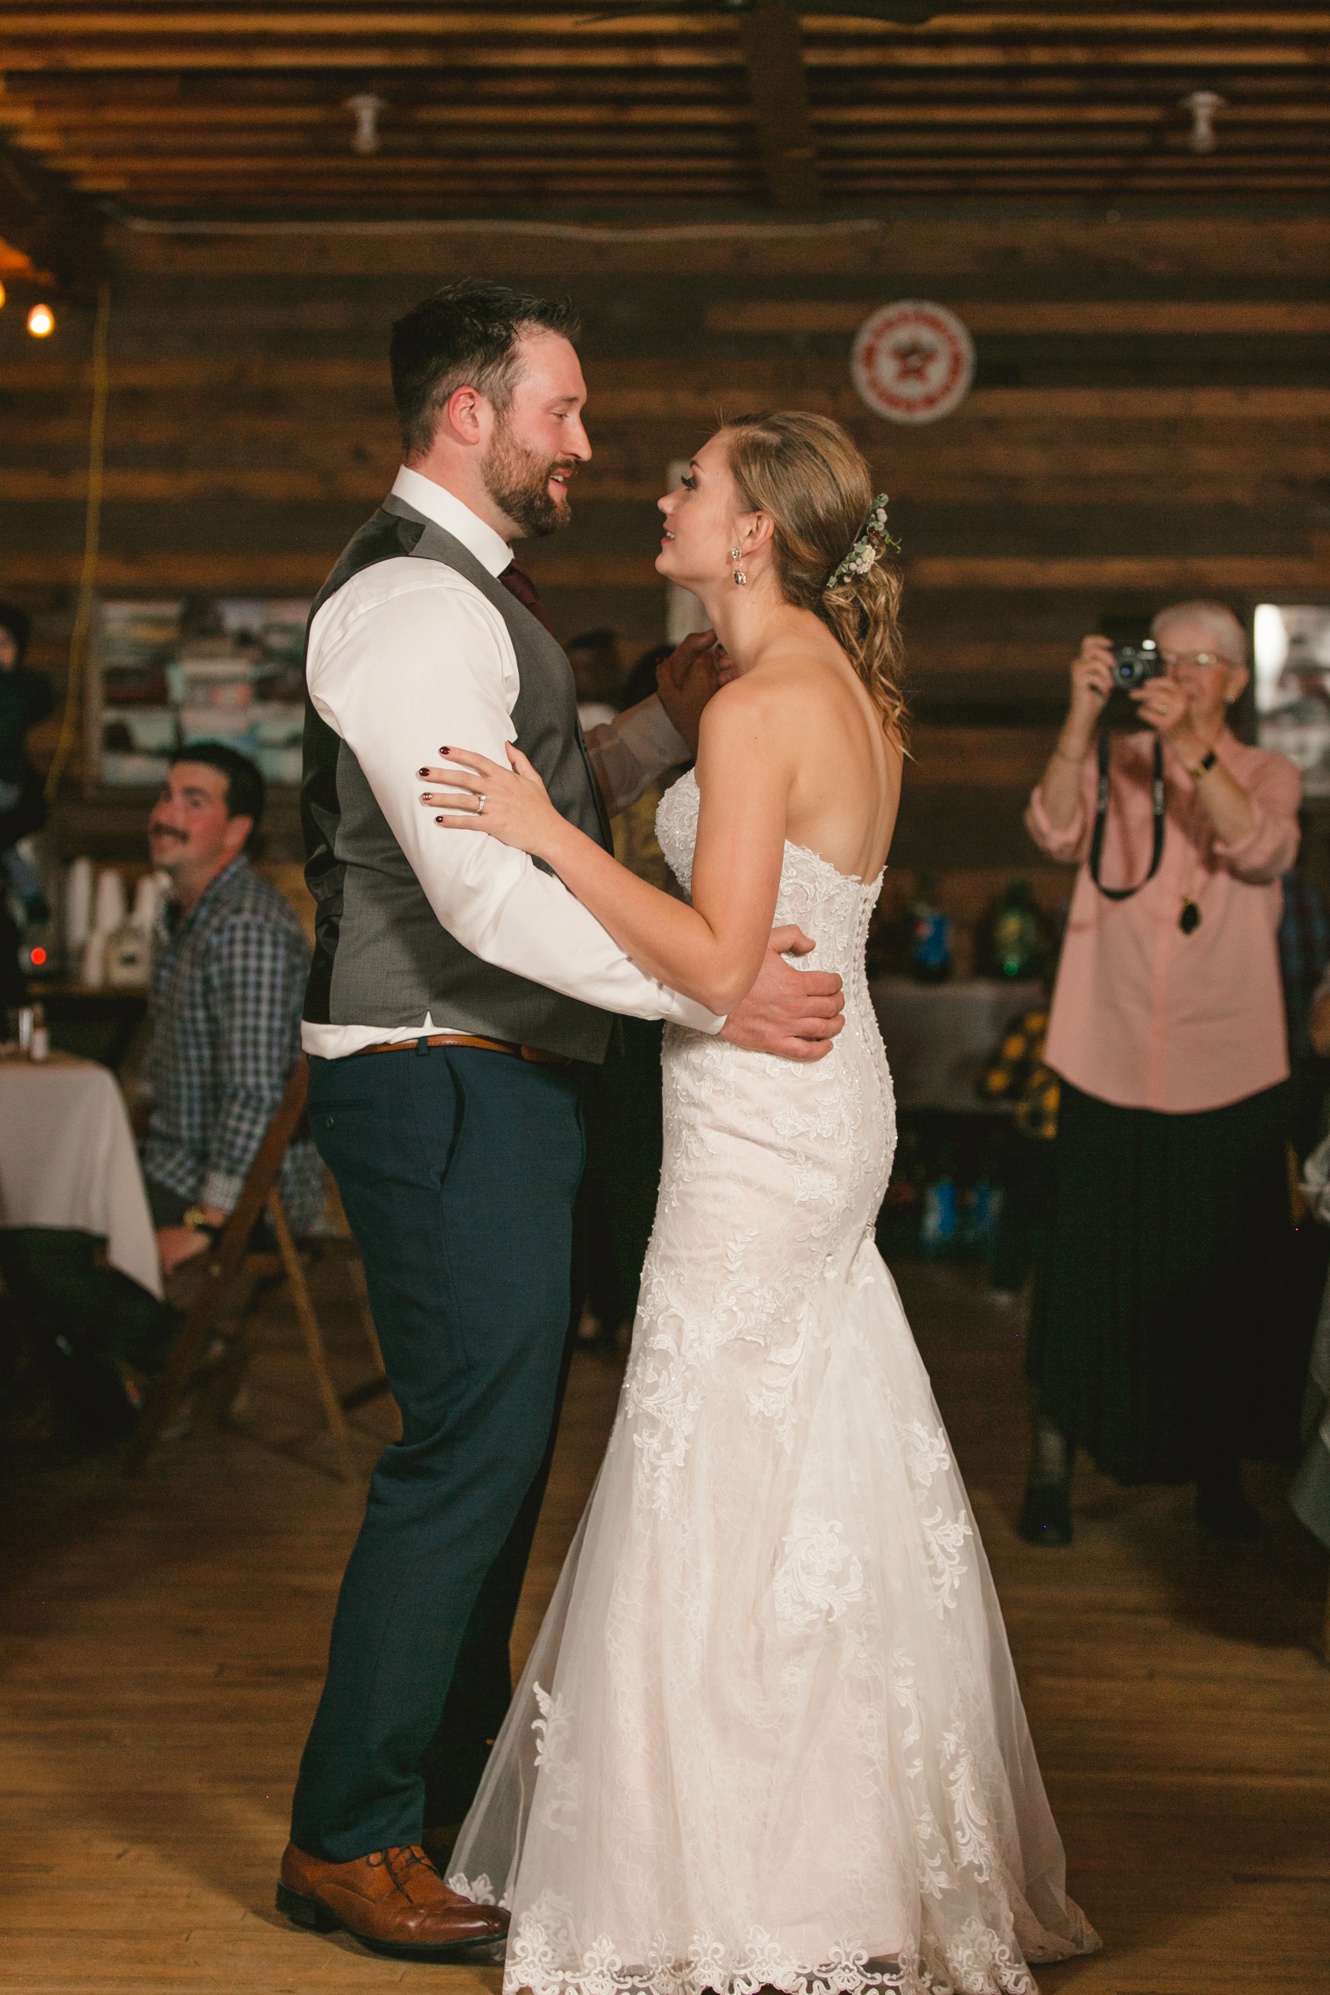 How to take first dance photos at a wedding photo